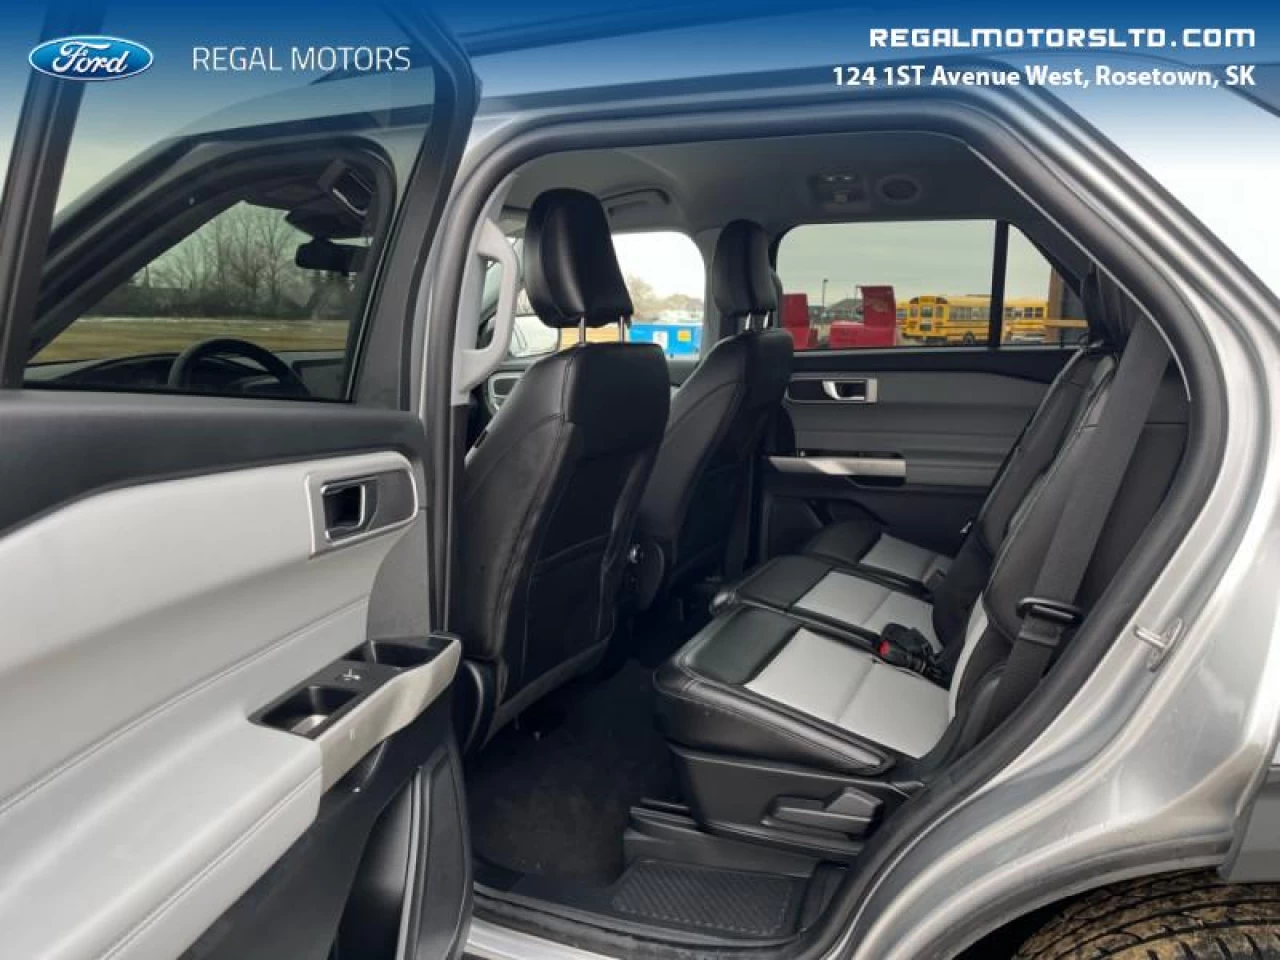 2022 Ford Explorer XLT High Package Main Image